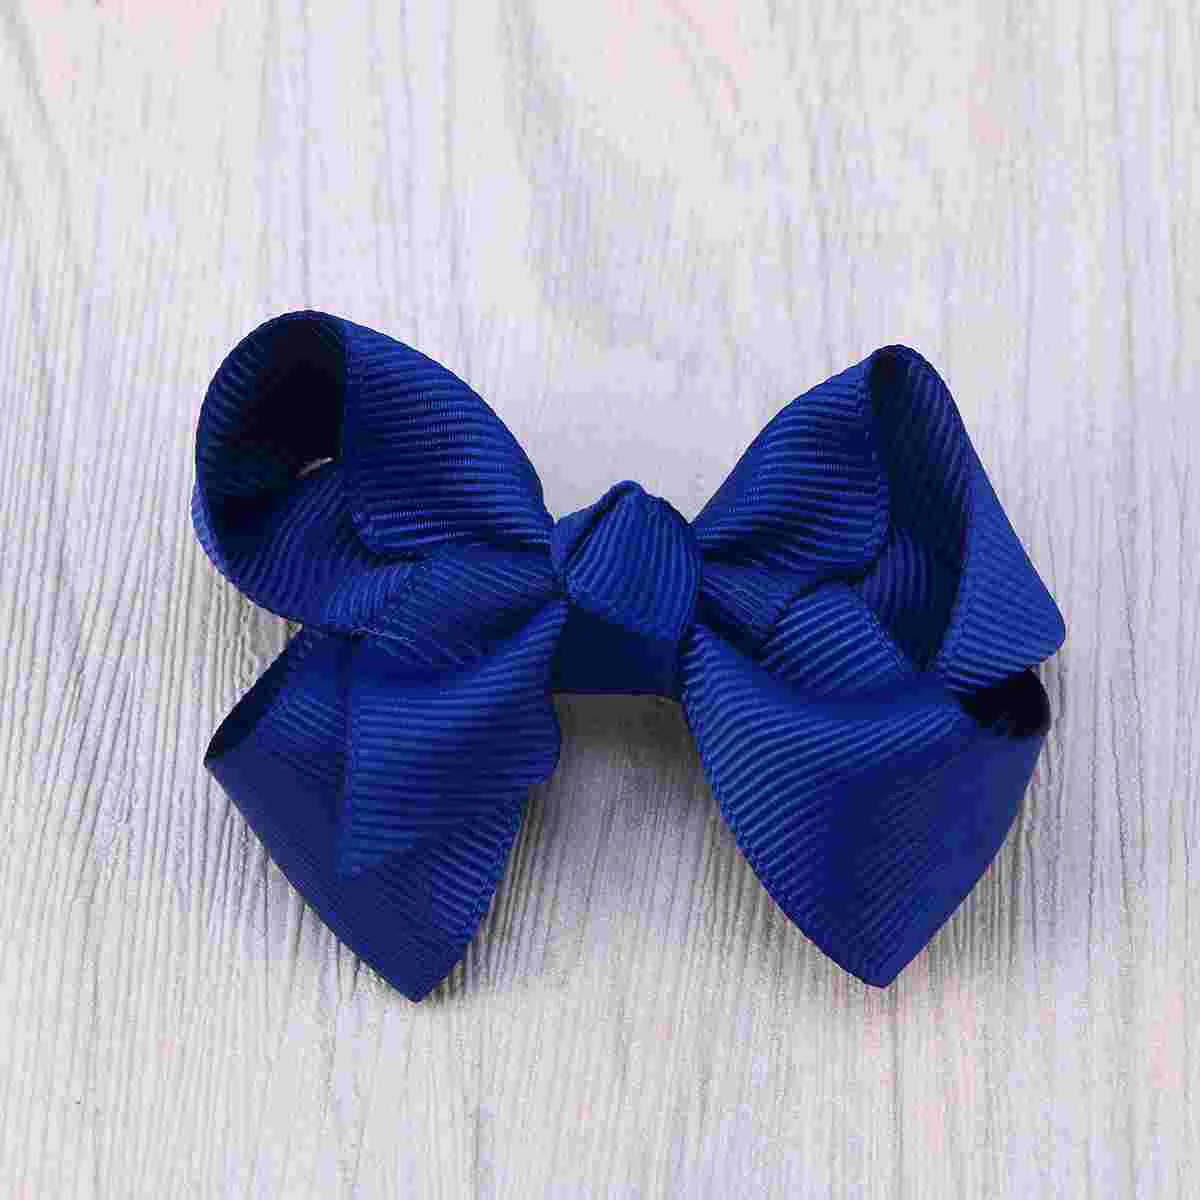 

12pcs Girls Small Hair Bows Grosgrain Ribbon Boutique Bows Clip Bow Tie Lovely Colorful Barrettes Hairpins Hair Accessories for